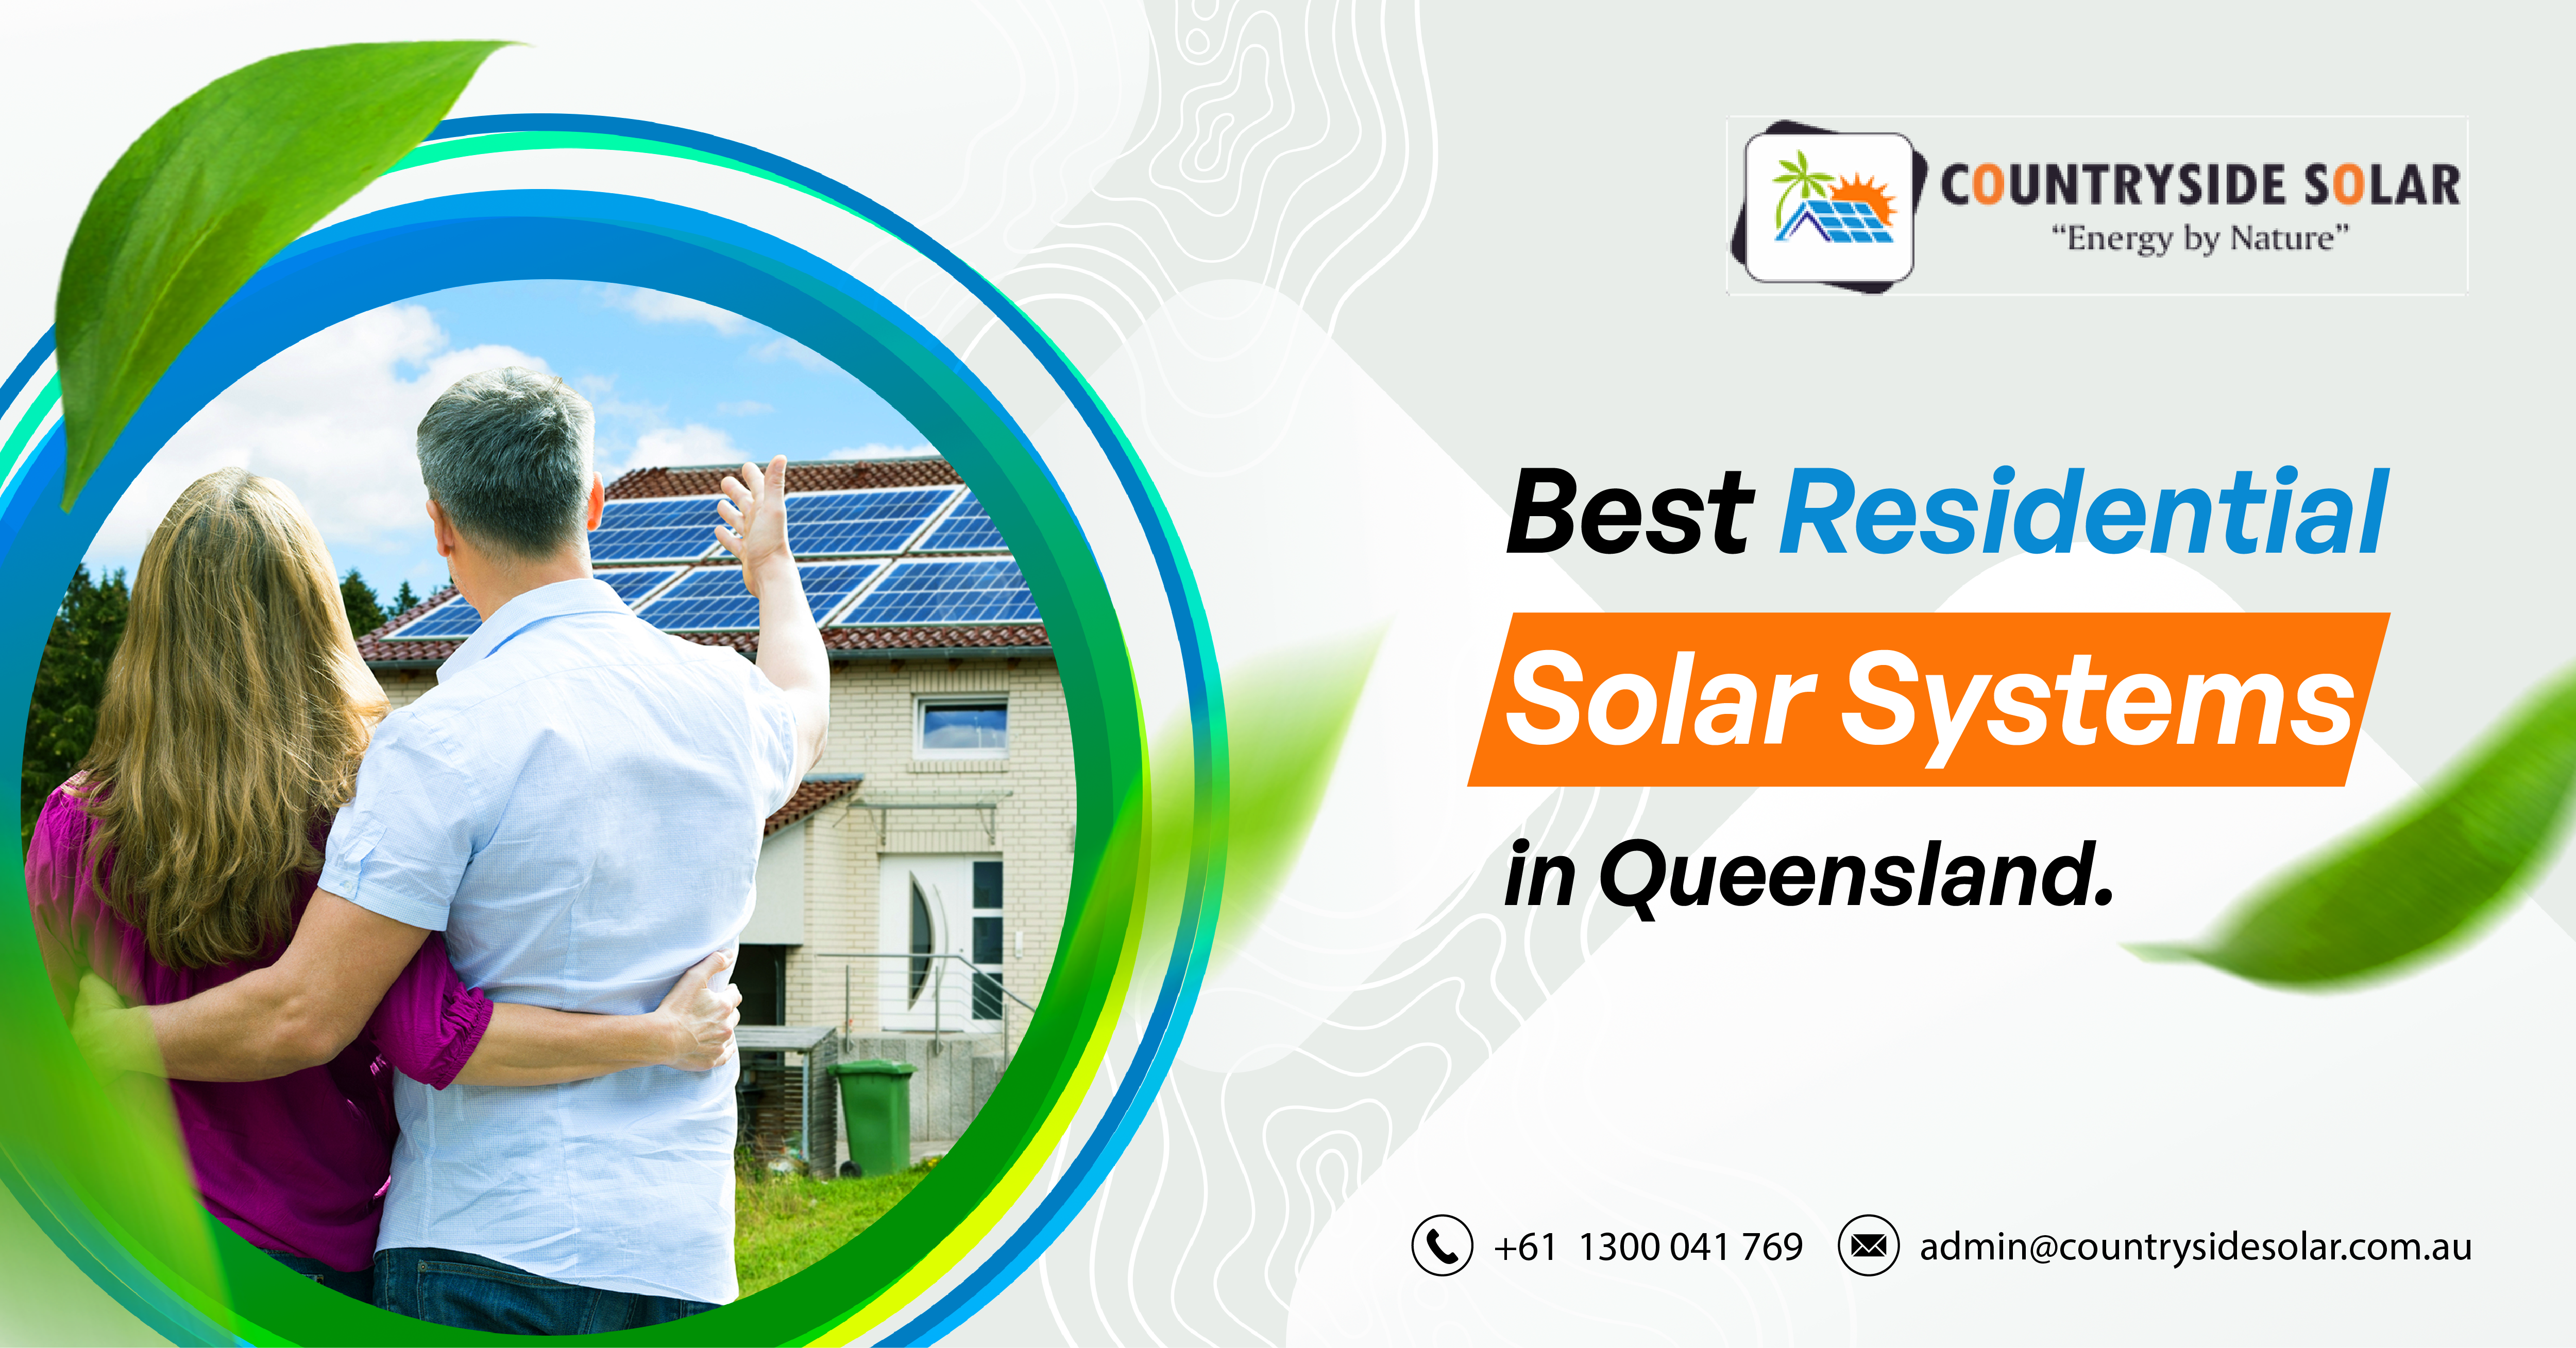 Best Residential Solar Systems in Queensland